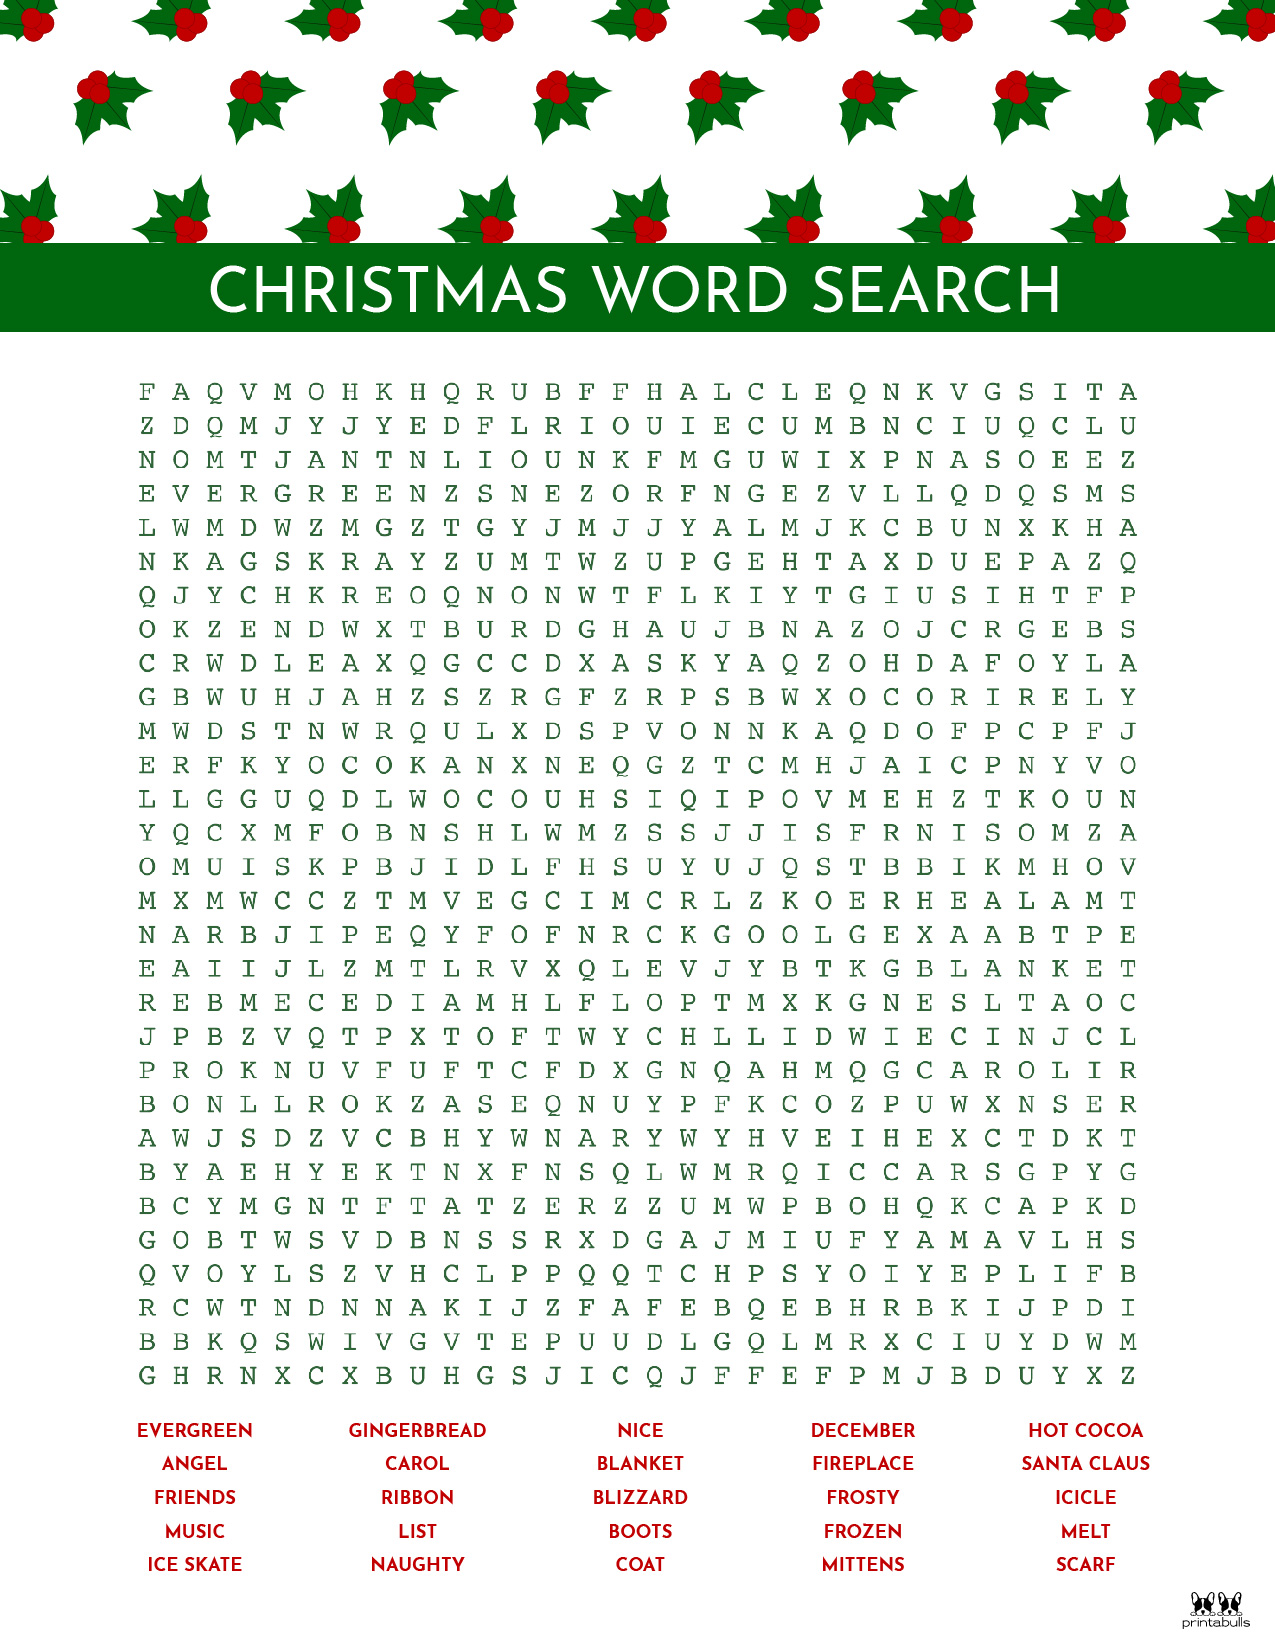 holiday-word-searches-printable-web-printable-word-search-puzzles